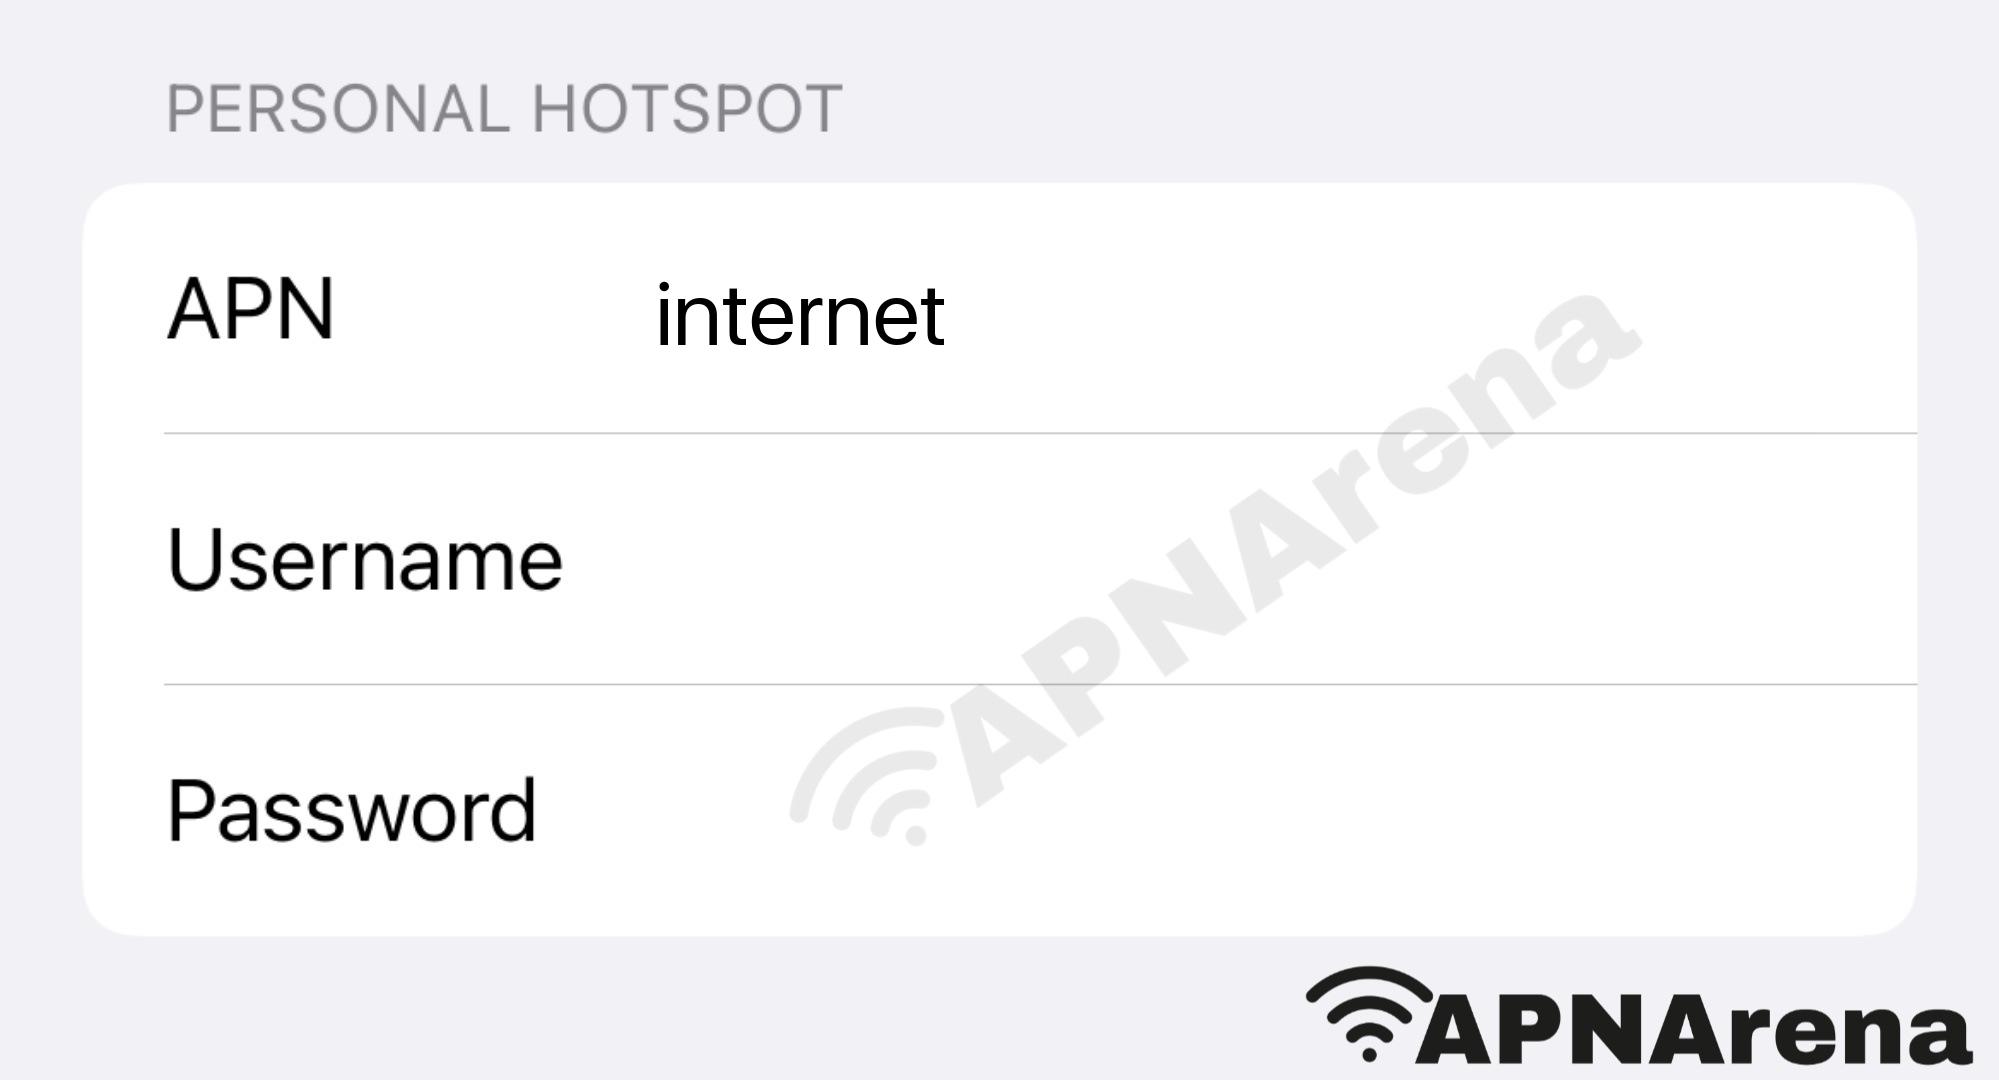 TextNow Personal Hotspot Settings for iPhone